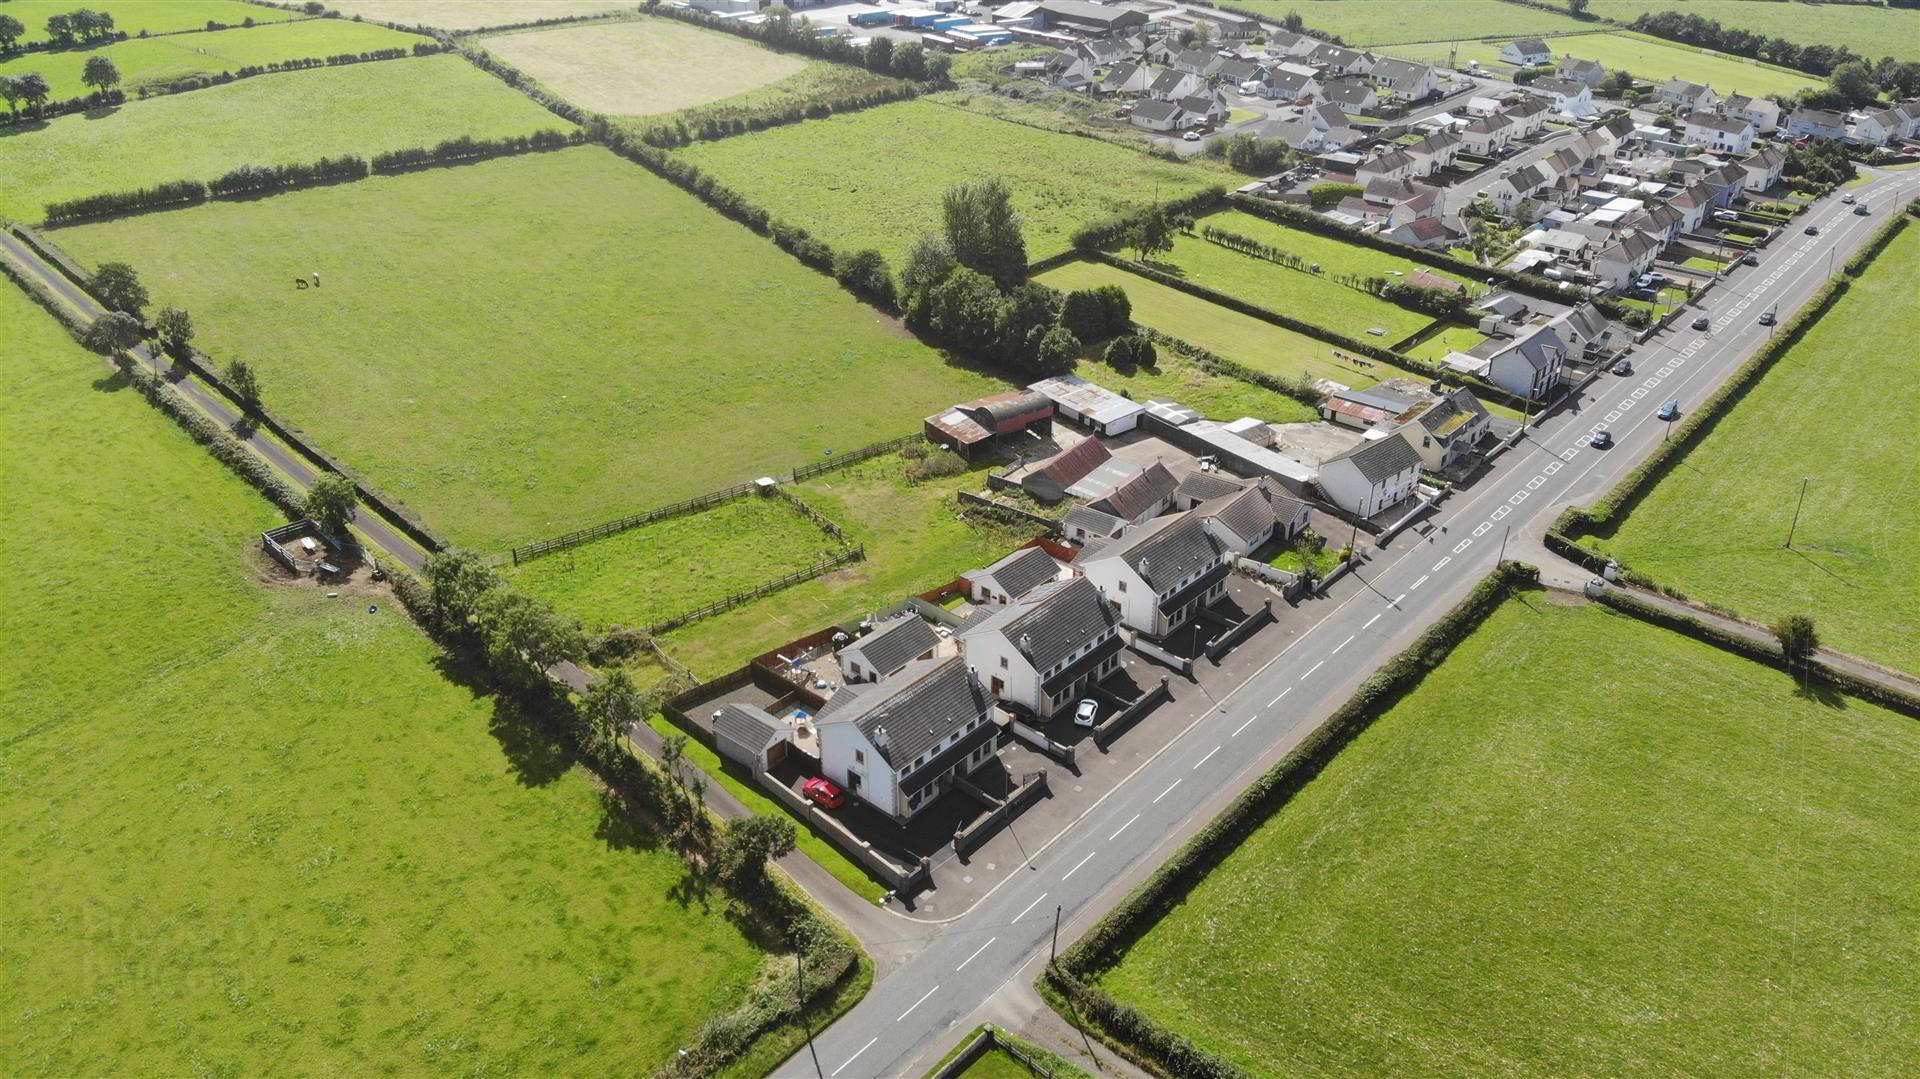 Development Site For, 12 Dwellings At Kilraughts Road